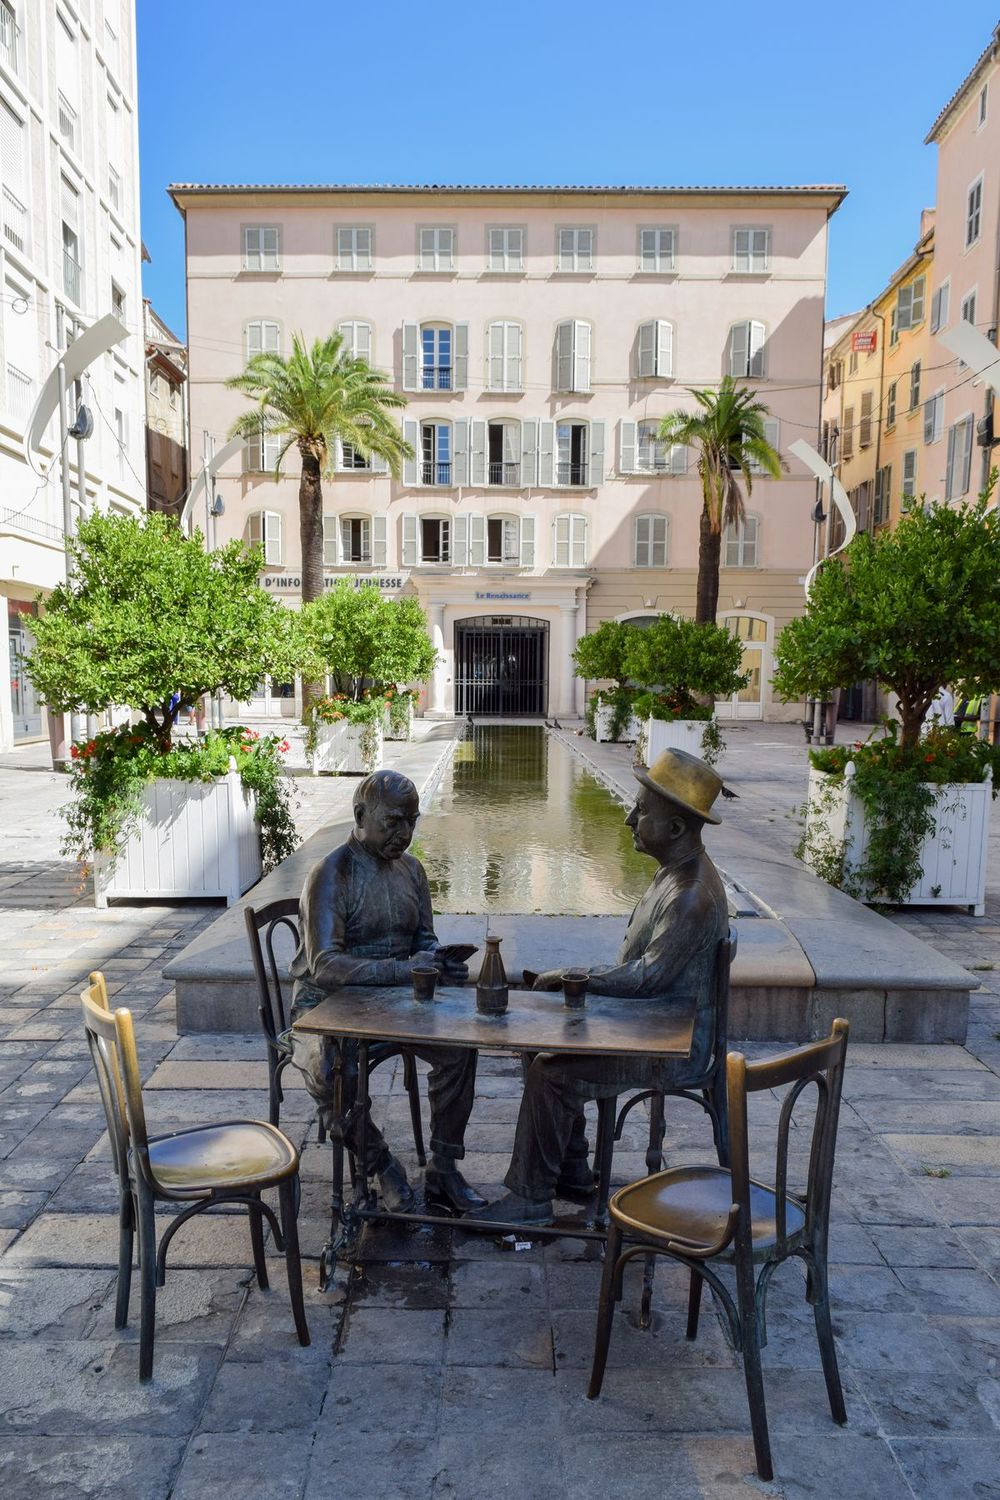 Statue of Men Playing Cards, Place Raimu Square, Toulon, France